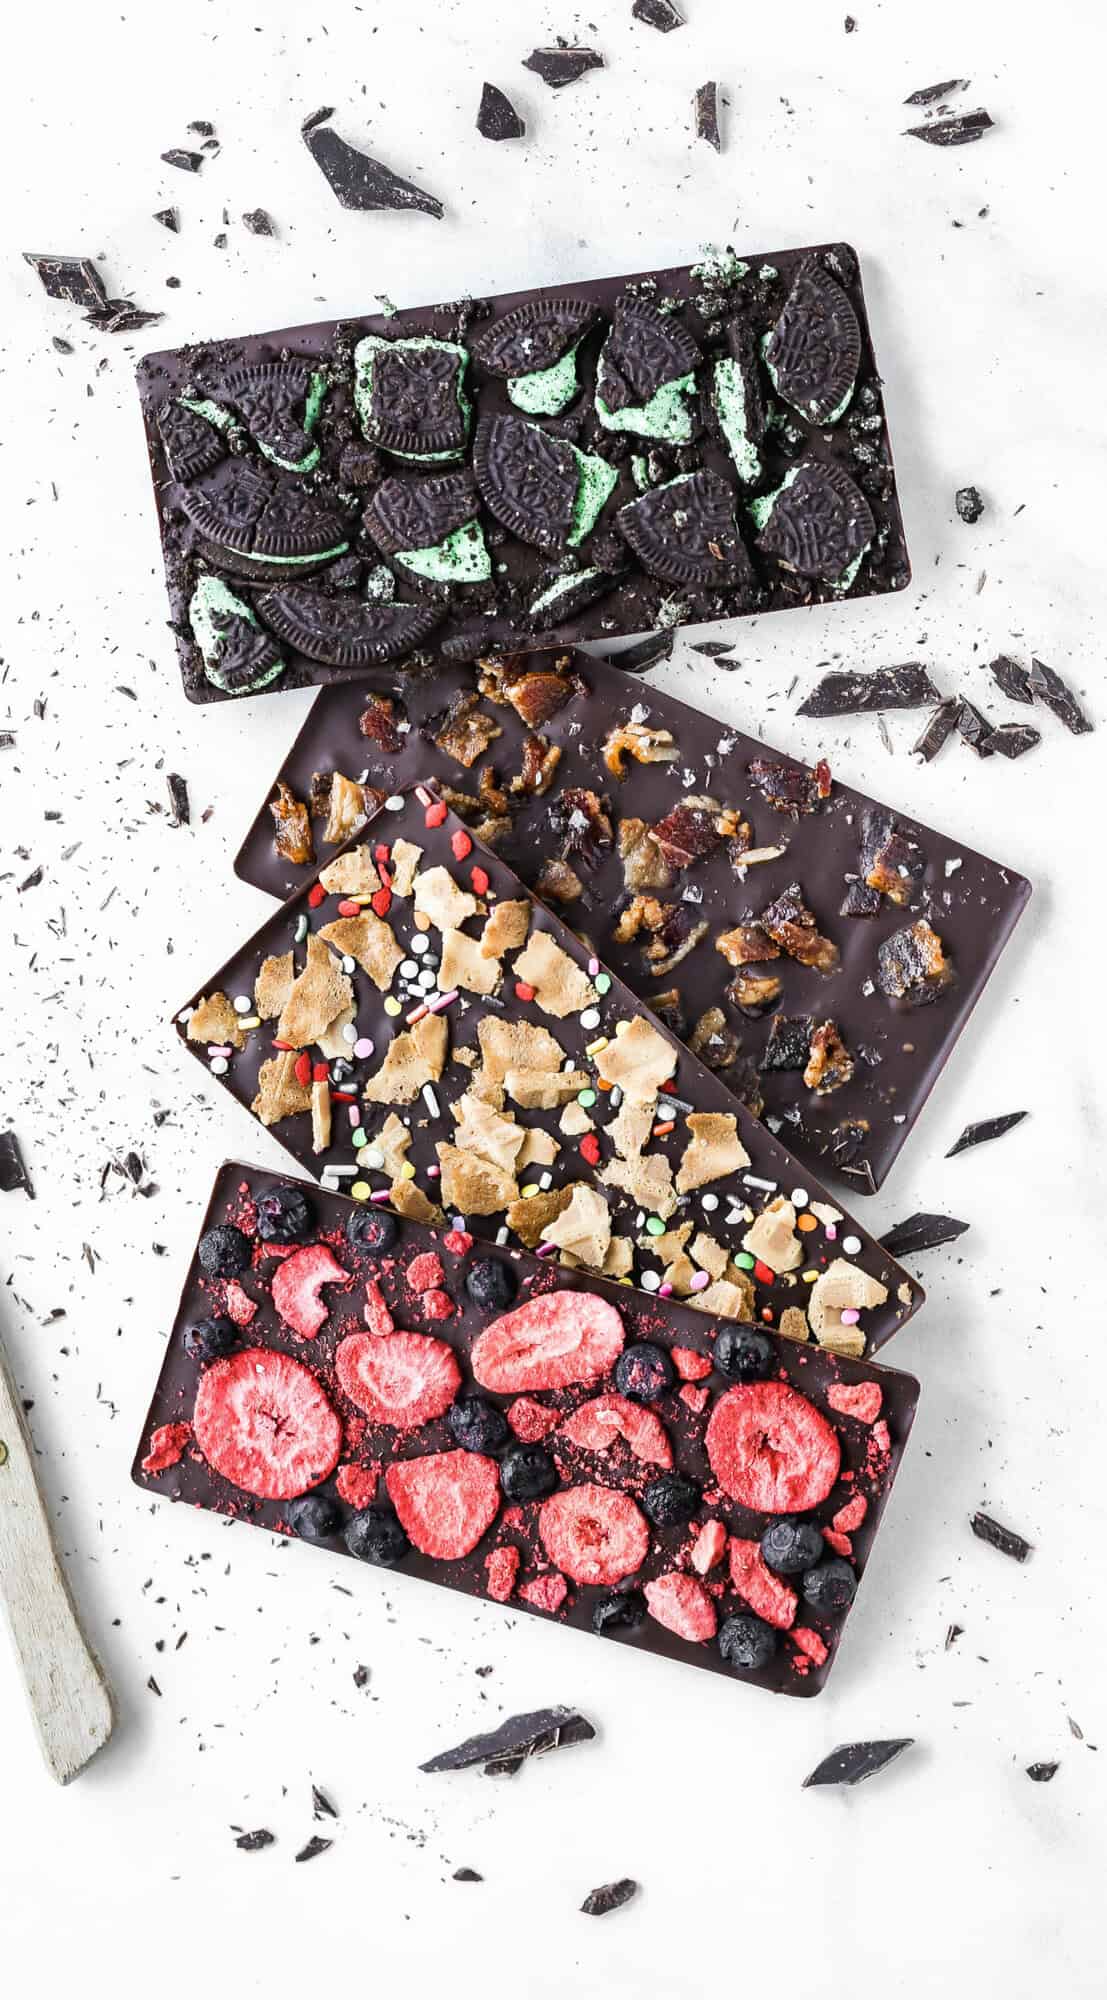 Homemade Chocolate Bars with DIY Wraps | Butternut Bakery